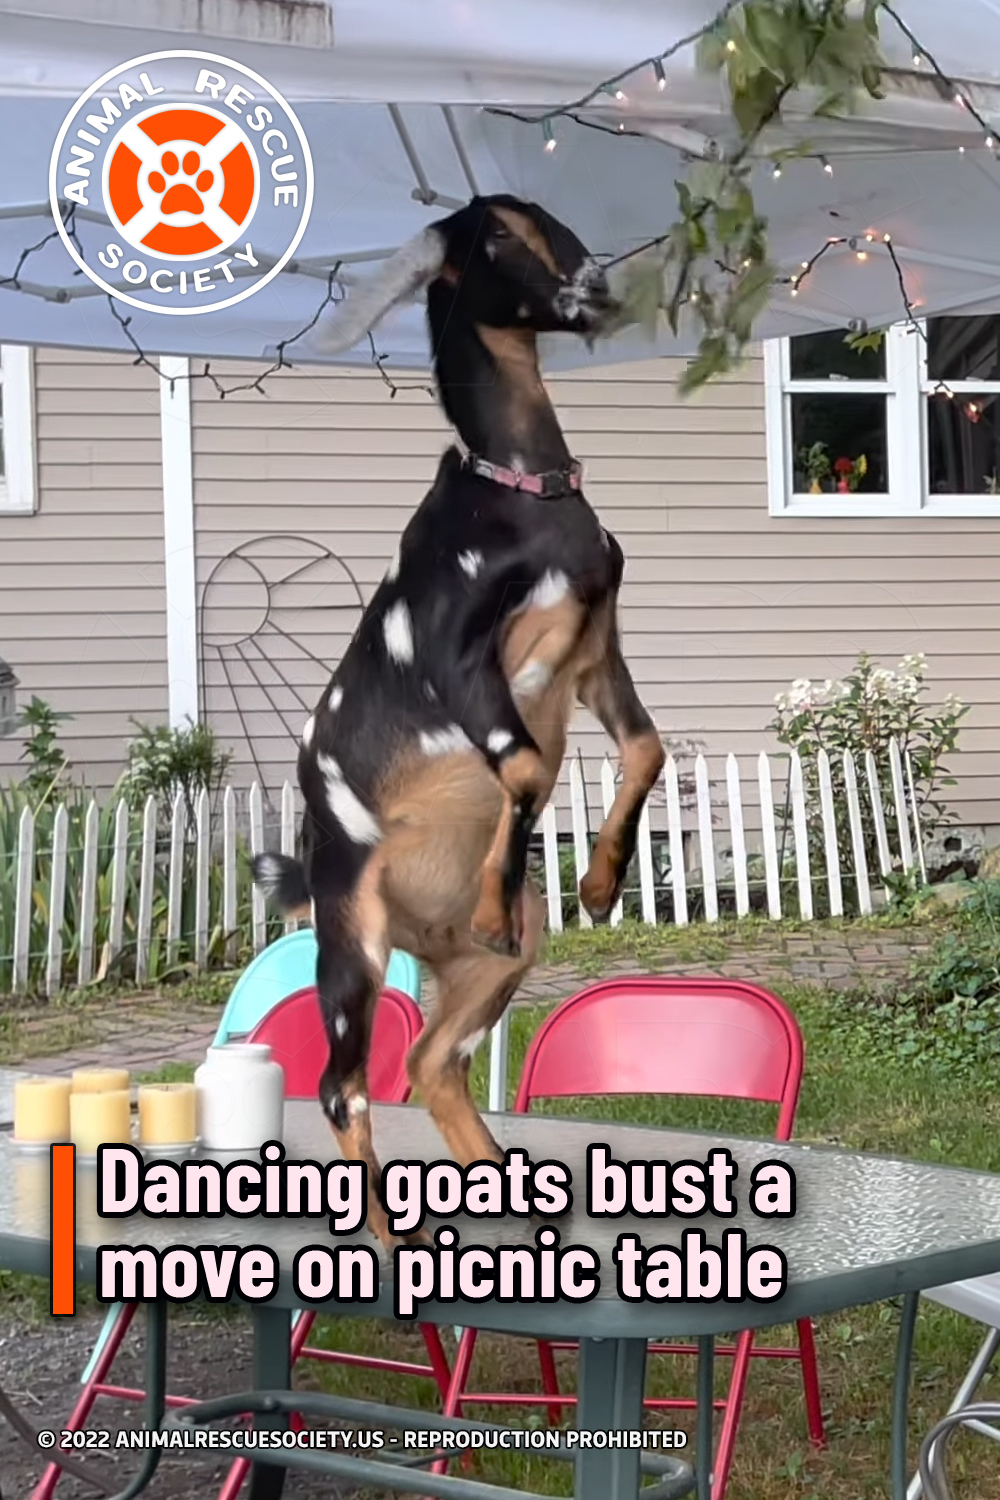 Dancing goats bust a move on picnic table